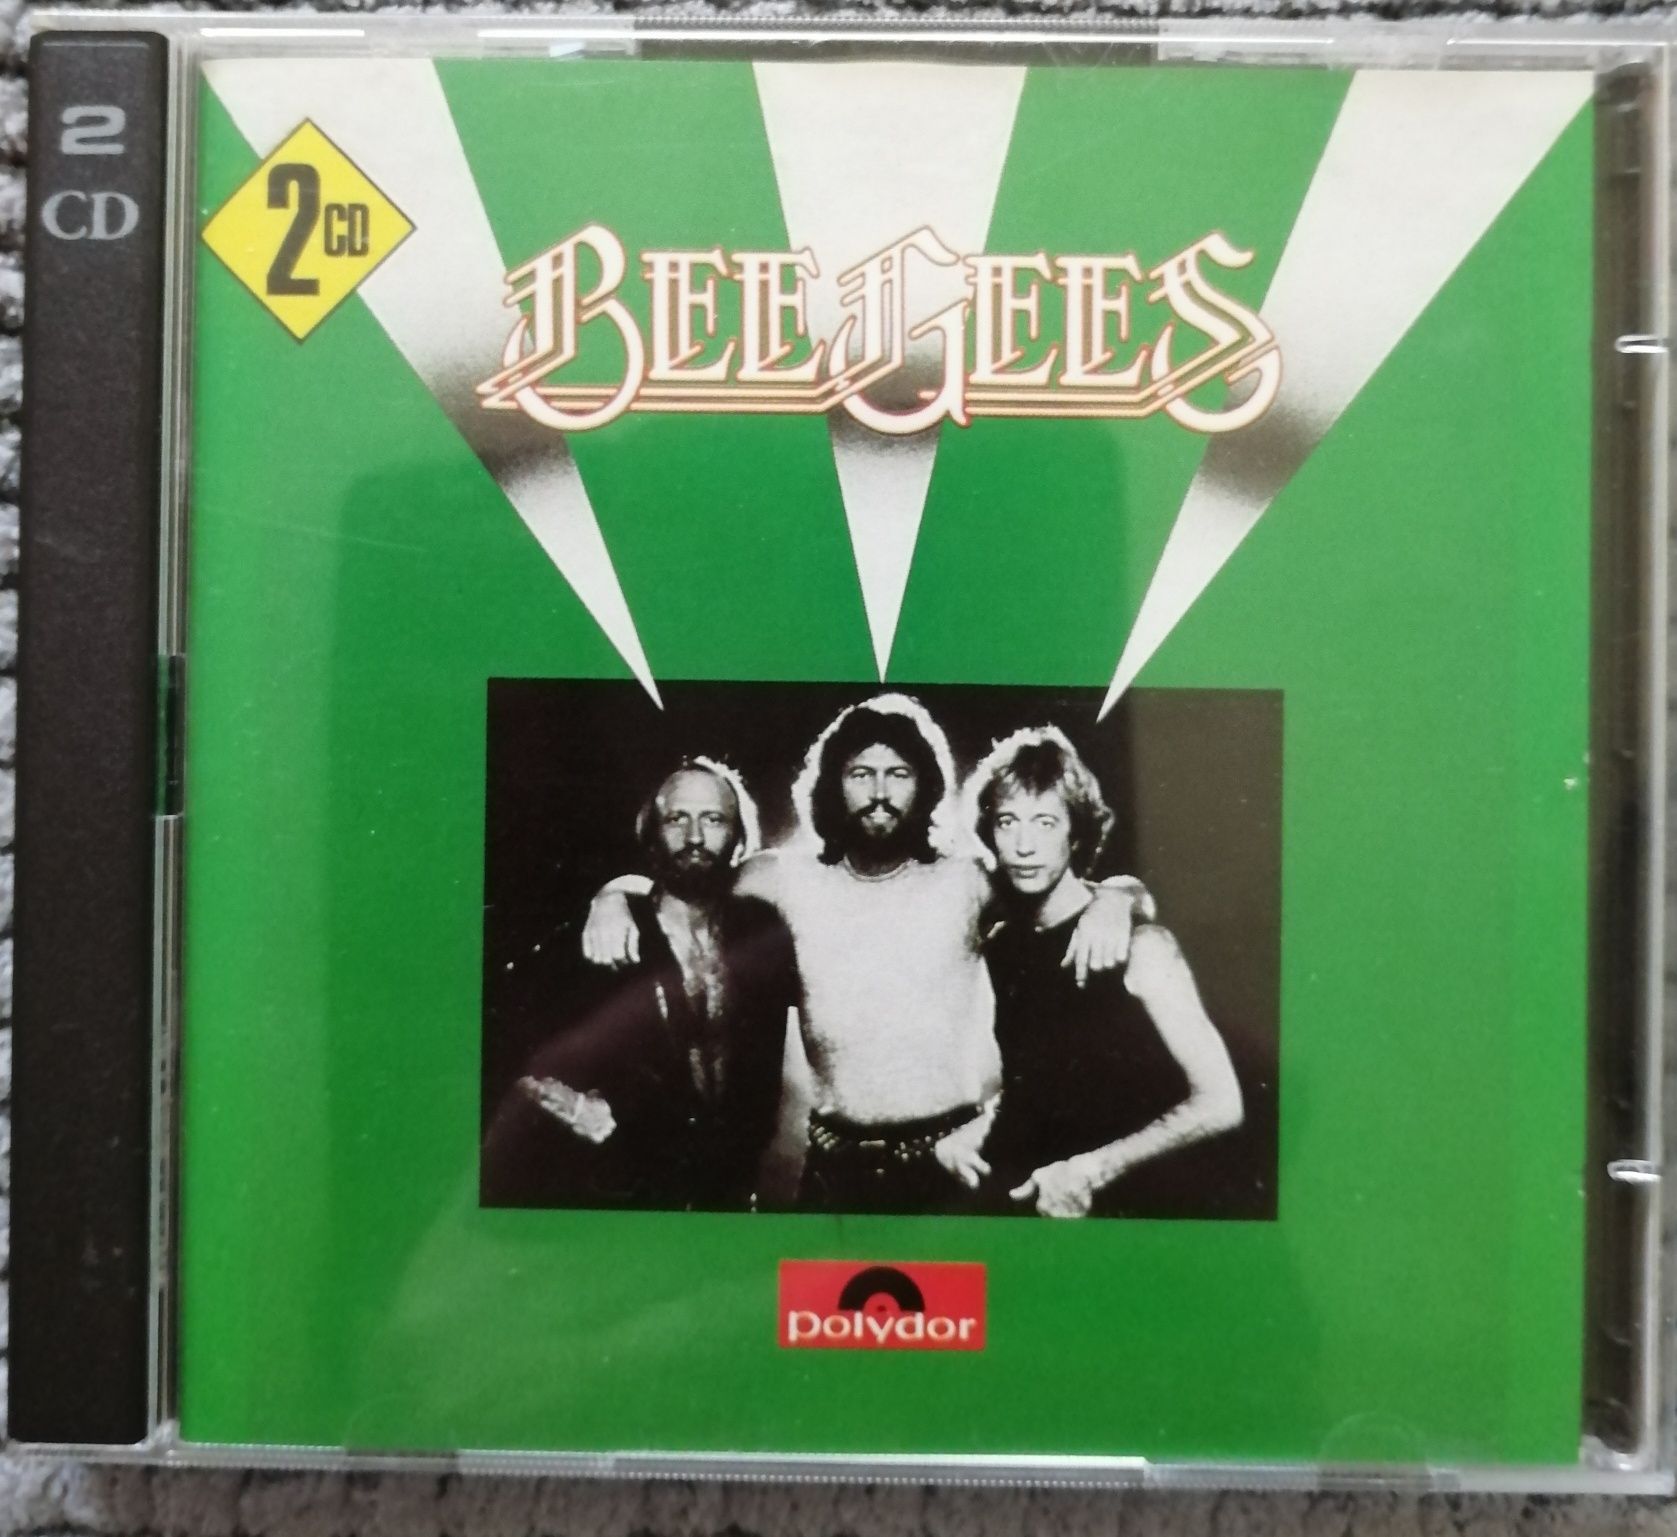 Bee Gees - Bee Gees 2xCD